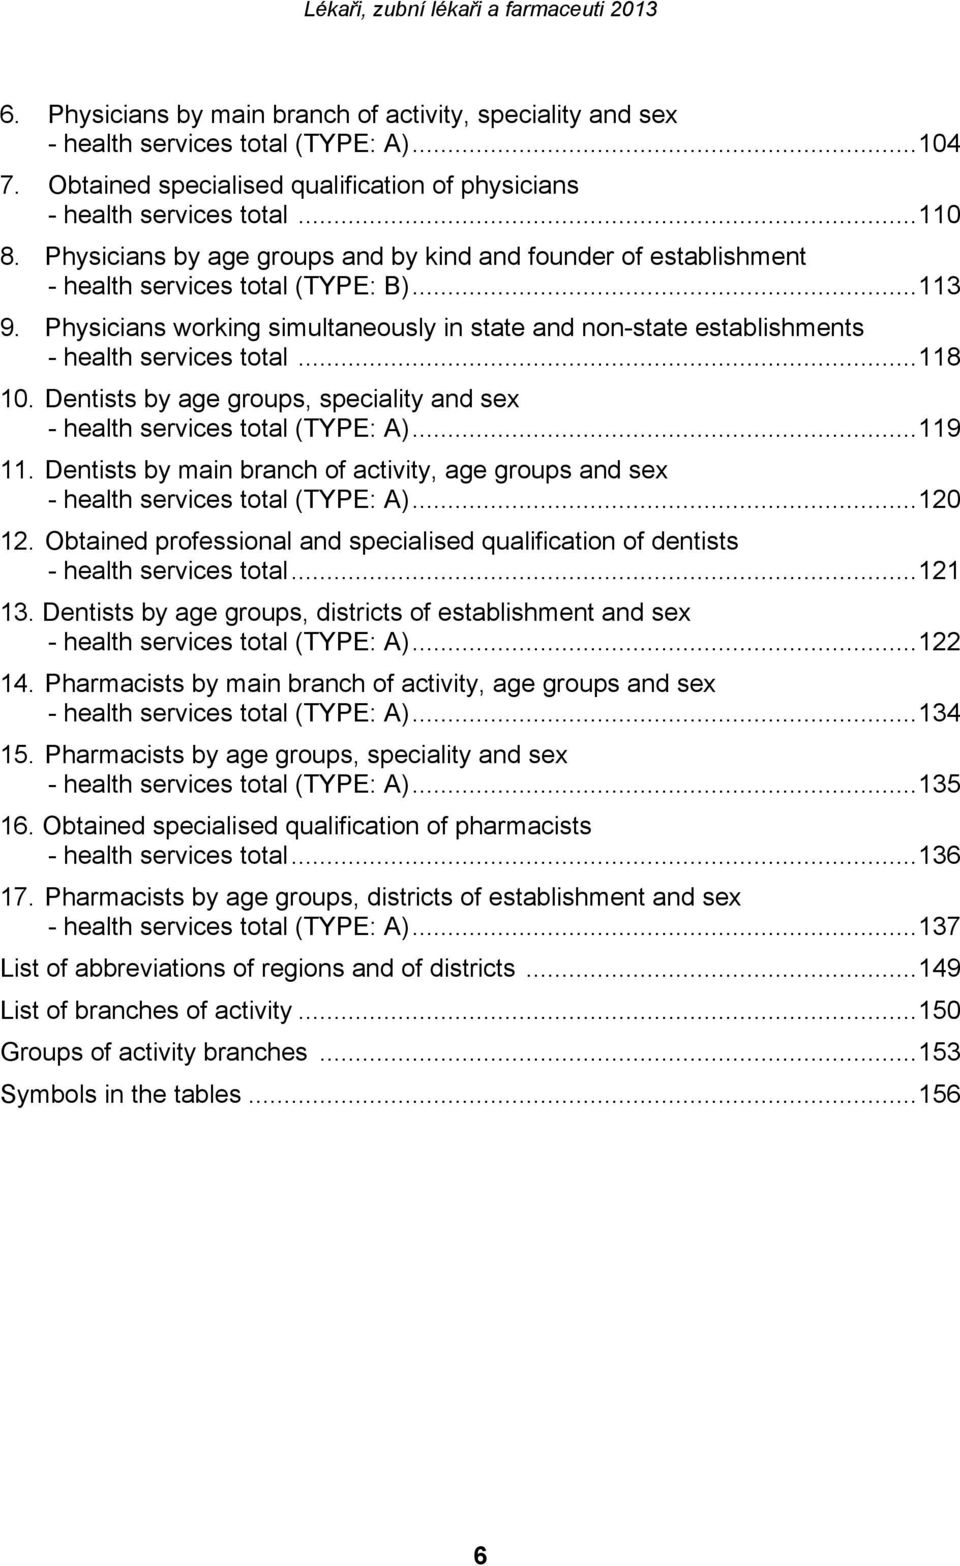 Physicians working simultaneously in state and non-state establishments - health services total... 118 10. Dentists by age groups, speciality and sex - health services total (TYPE: A)... 119 11.